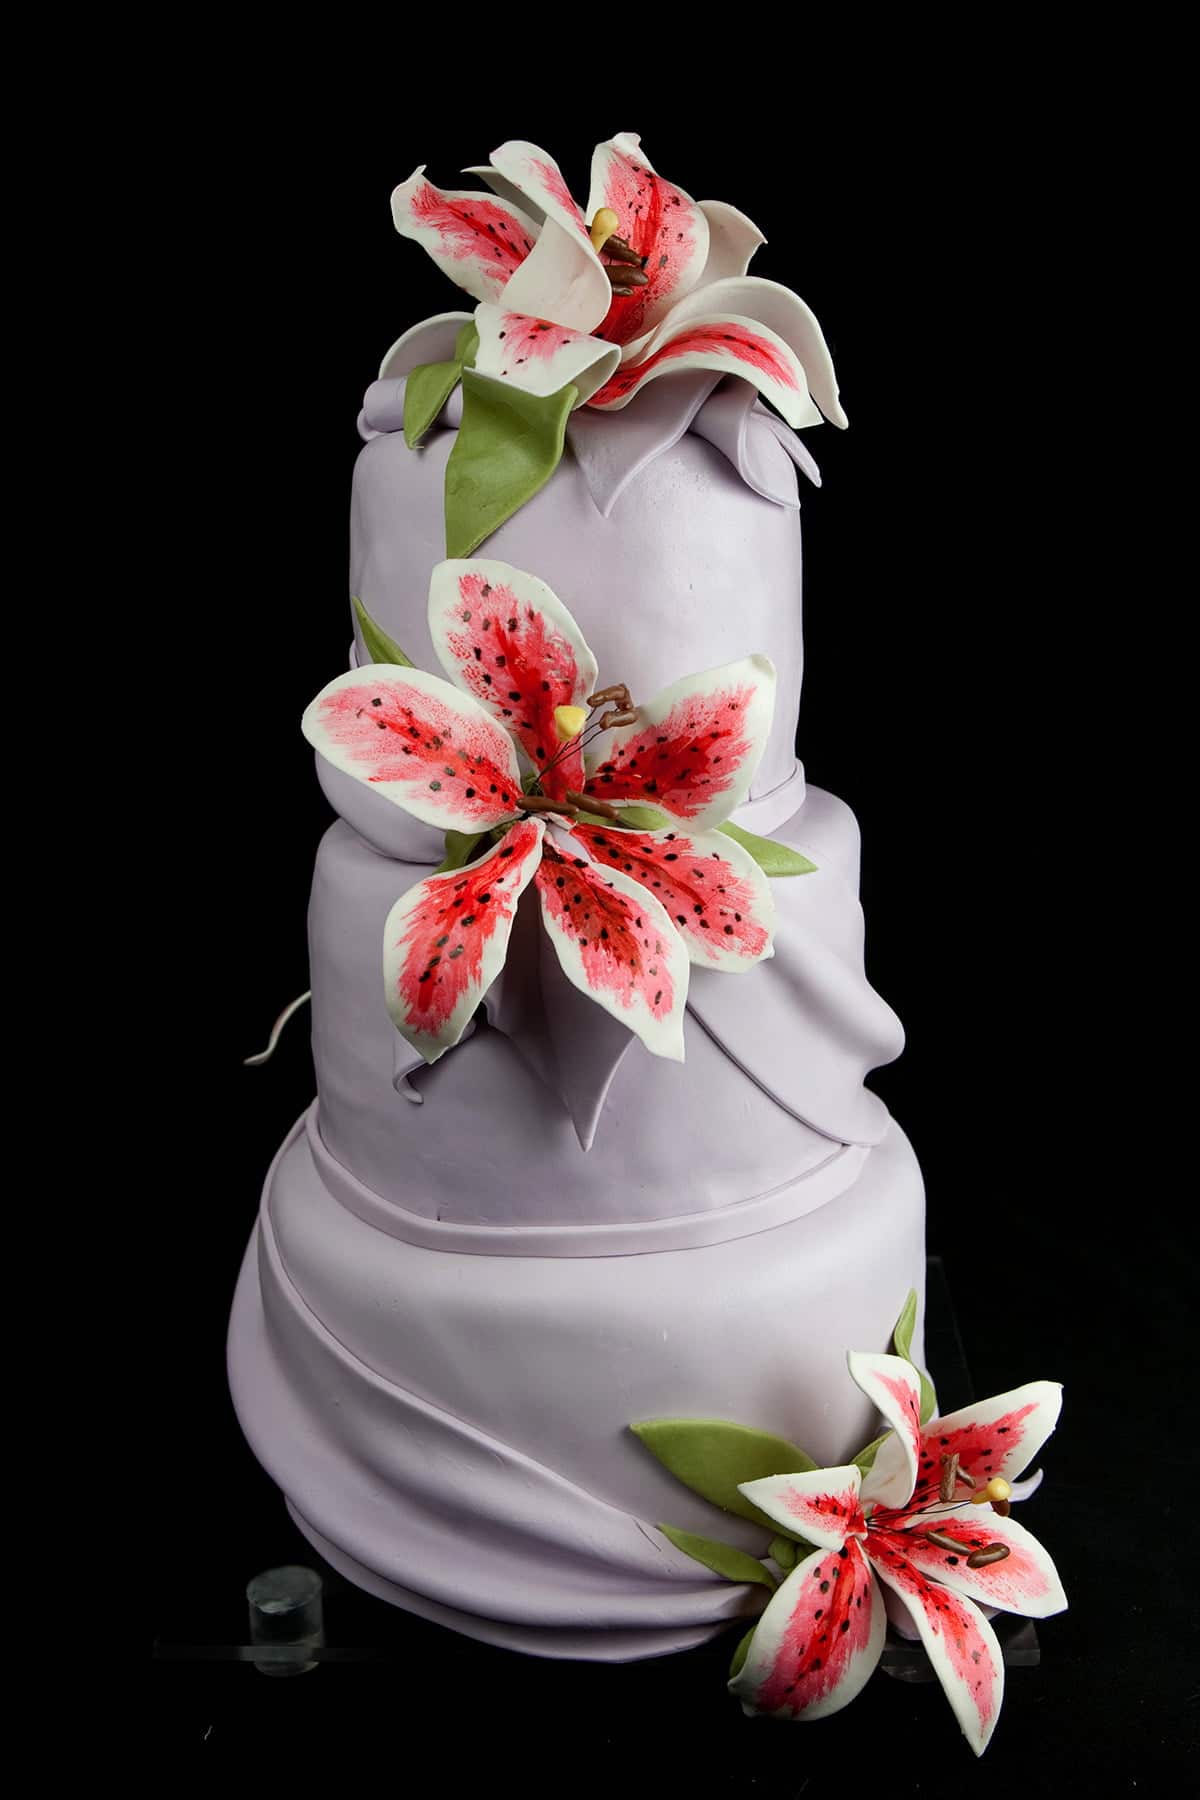 A 3 tiered purple wedding cake. The cake is covered in lavender fondant, and features swags of matching fondant and sugar Stargazer Lilies.